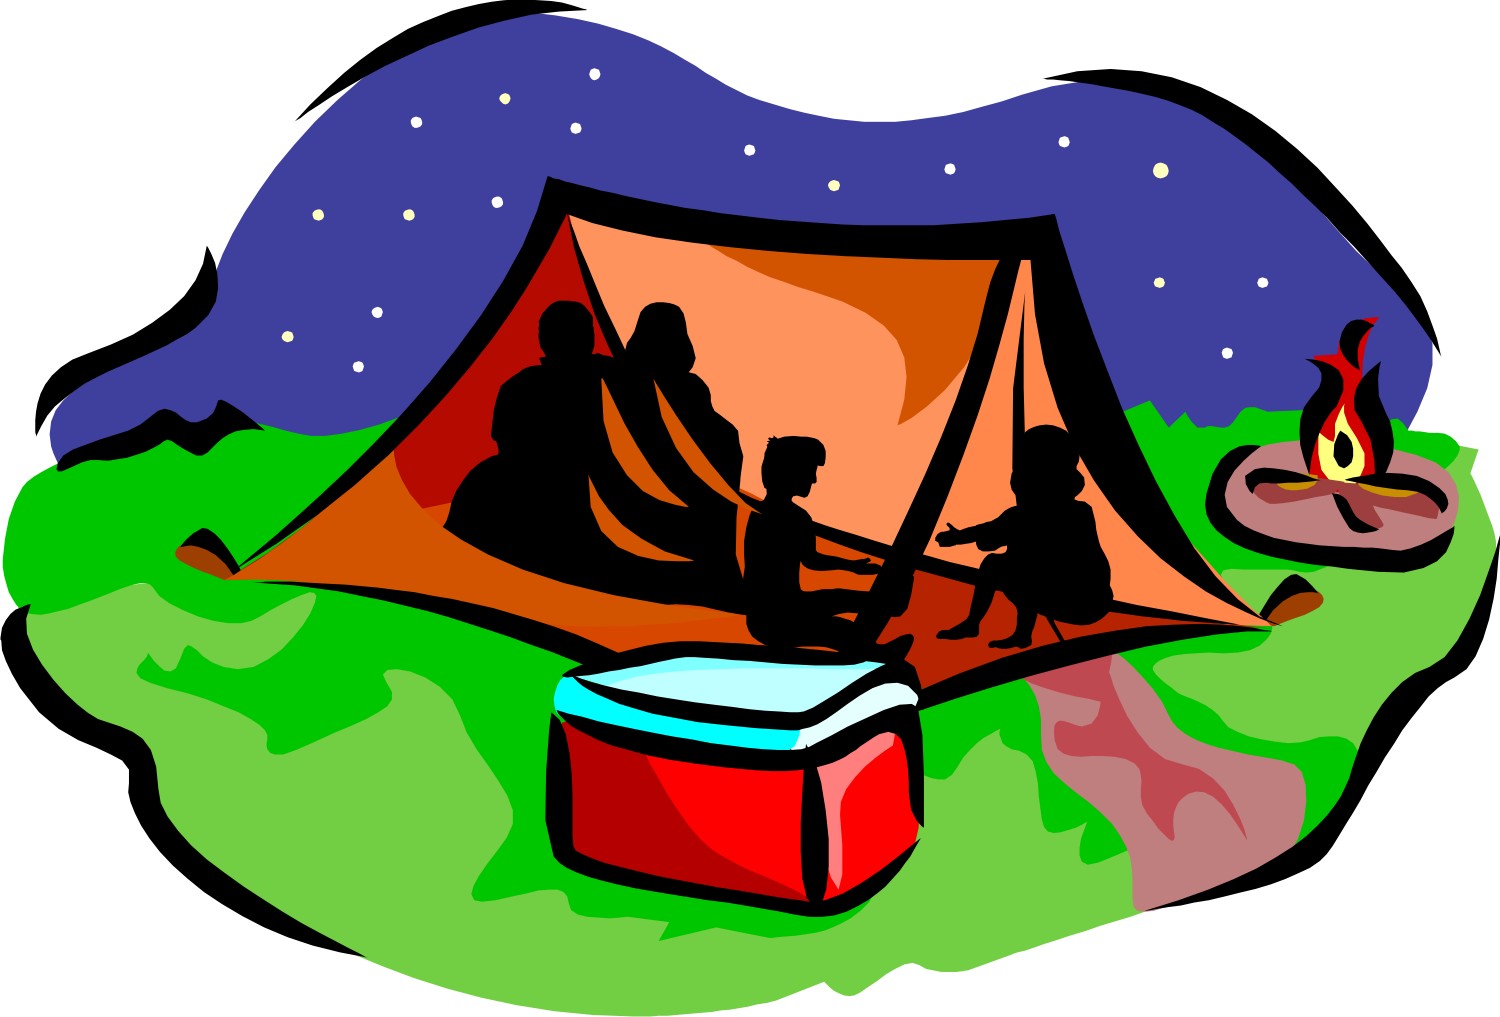 Animated Camping Trip Clipart Free - ClipArt Best